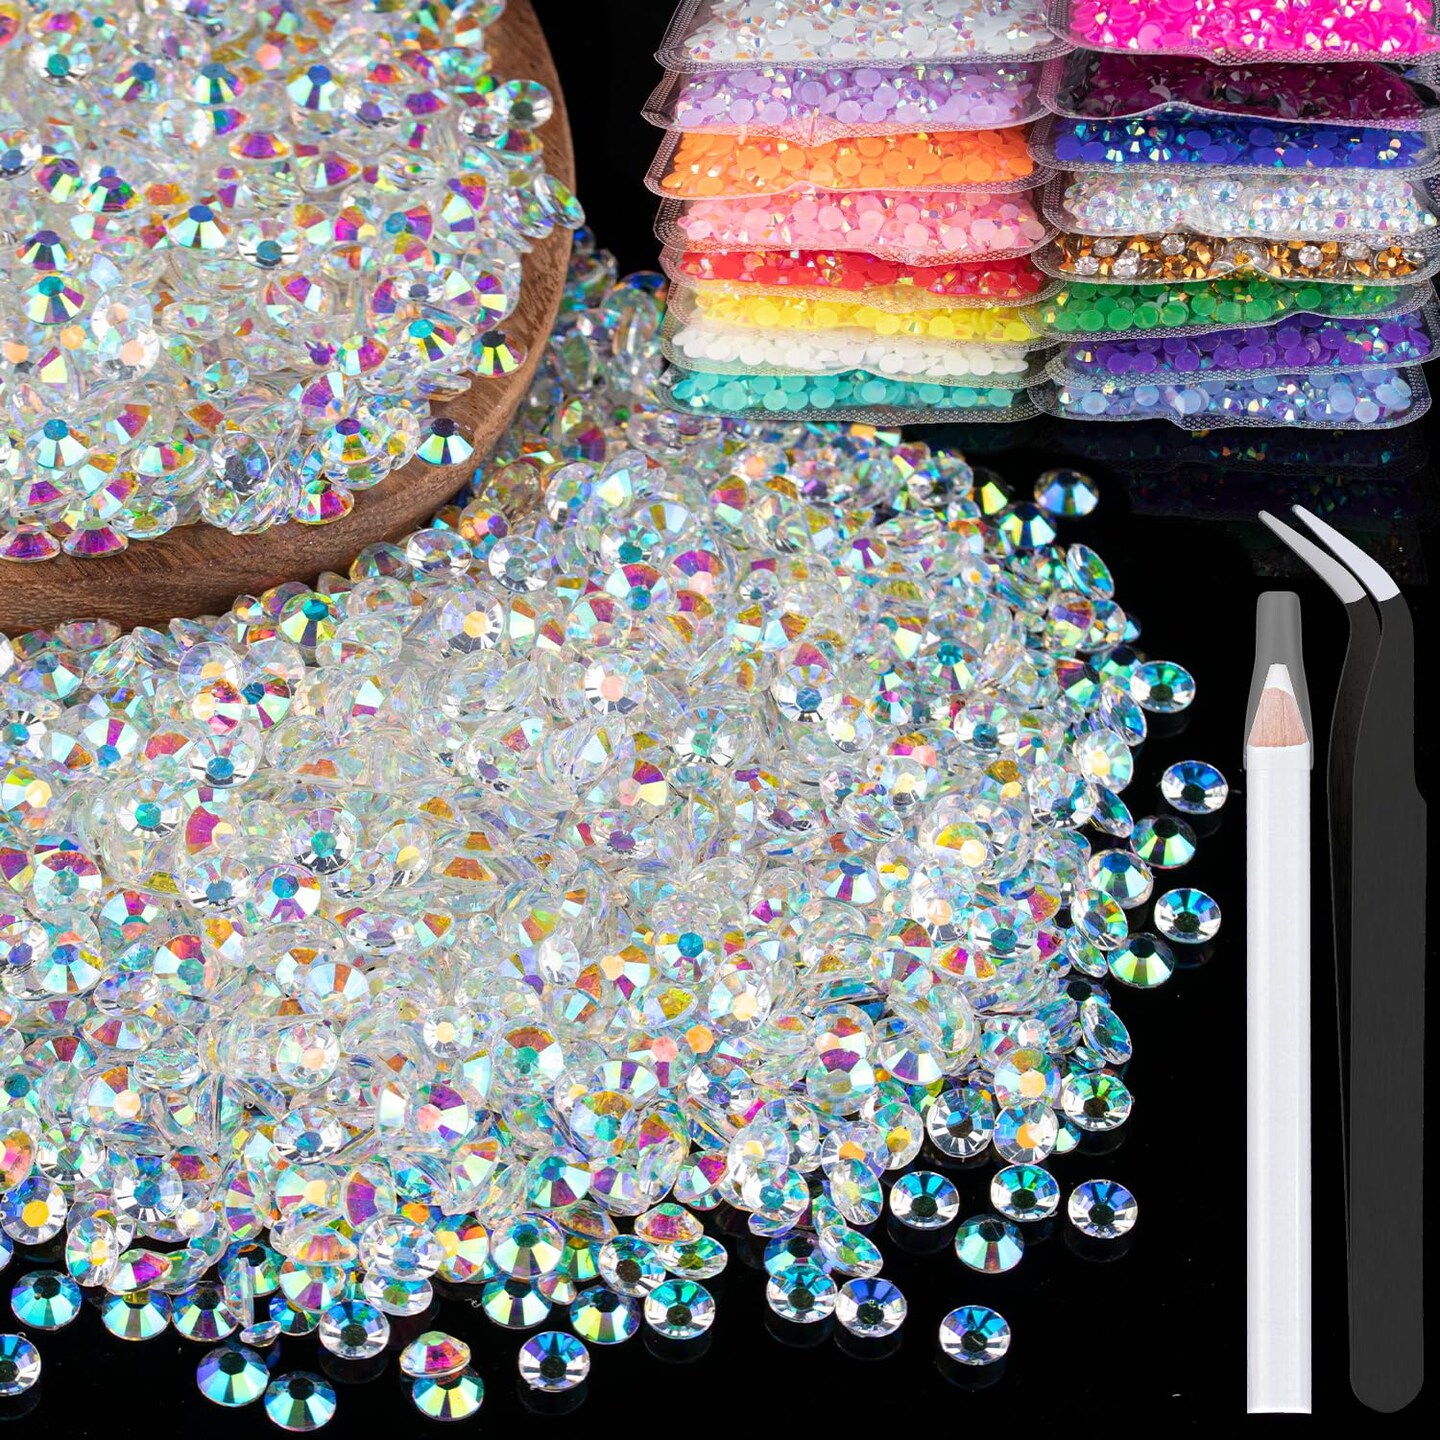 5000pcs 3mm Resin Rhinestones Bulk, Transparent AB Flatback Round Jelly Rhinestones Bedazzling Non Hotfix Crystal Gems Large Quantity Wholesale for DIY Crafts Clothes Tumblers Face Makeup Manicure